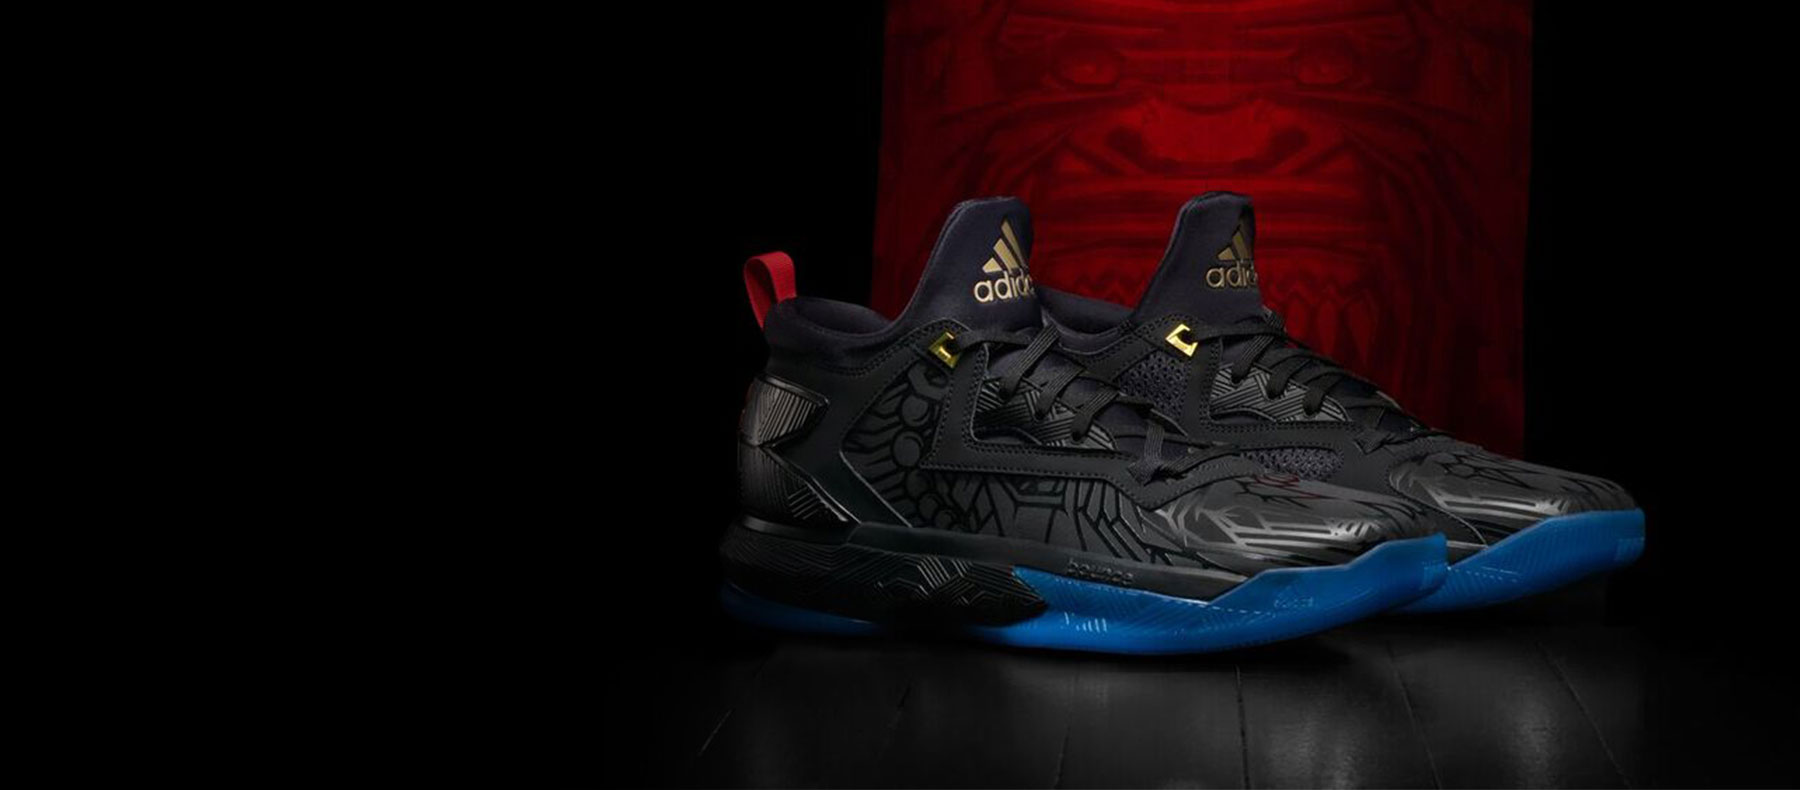 Updates On When and Where to Find the adidas D Lillard 2 4